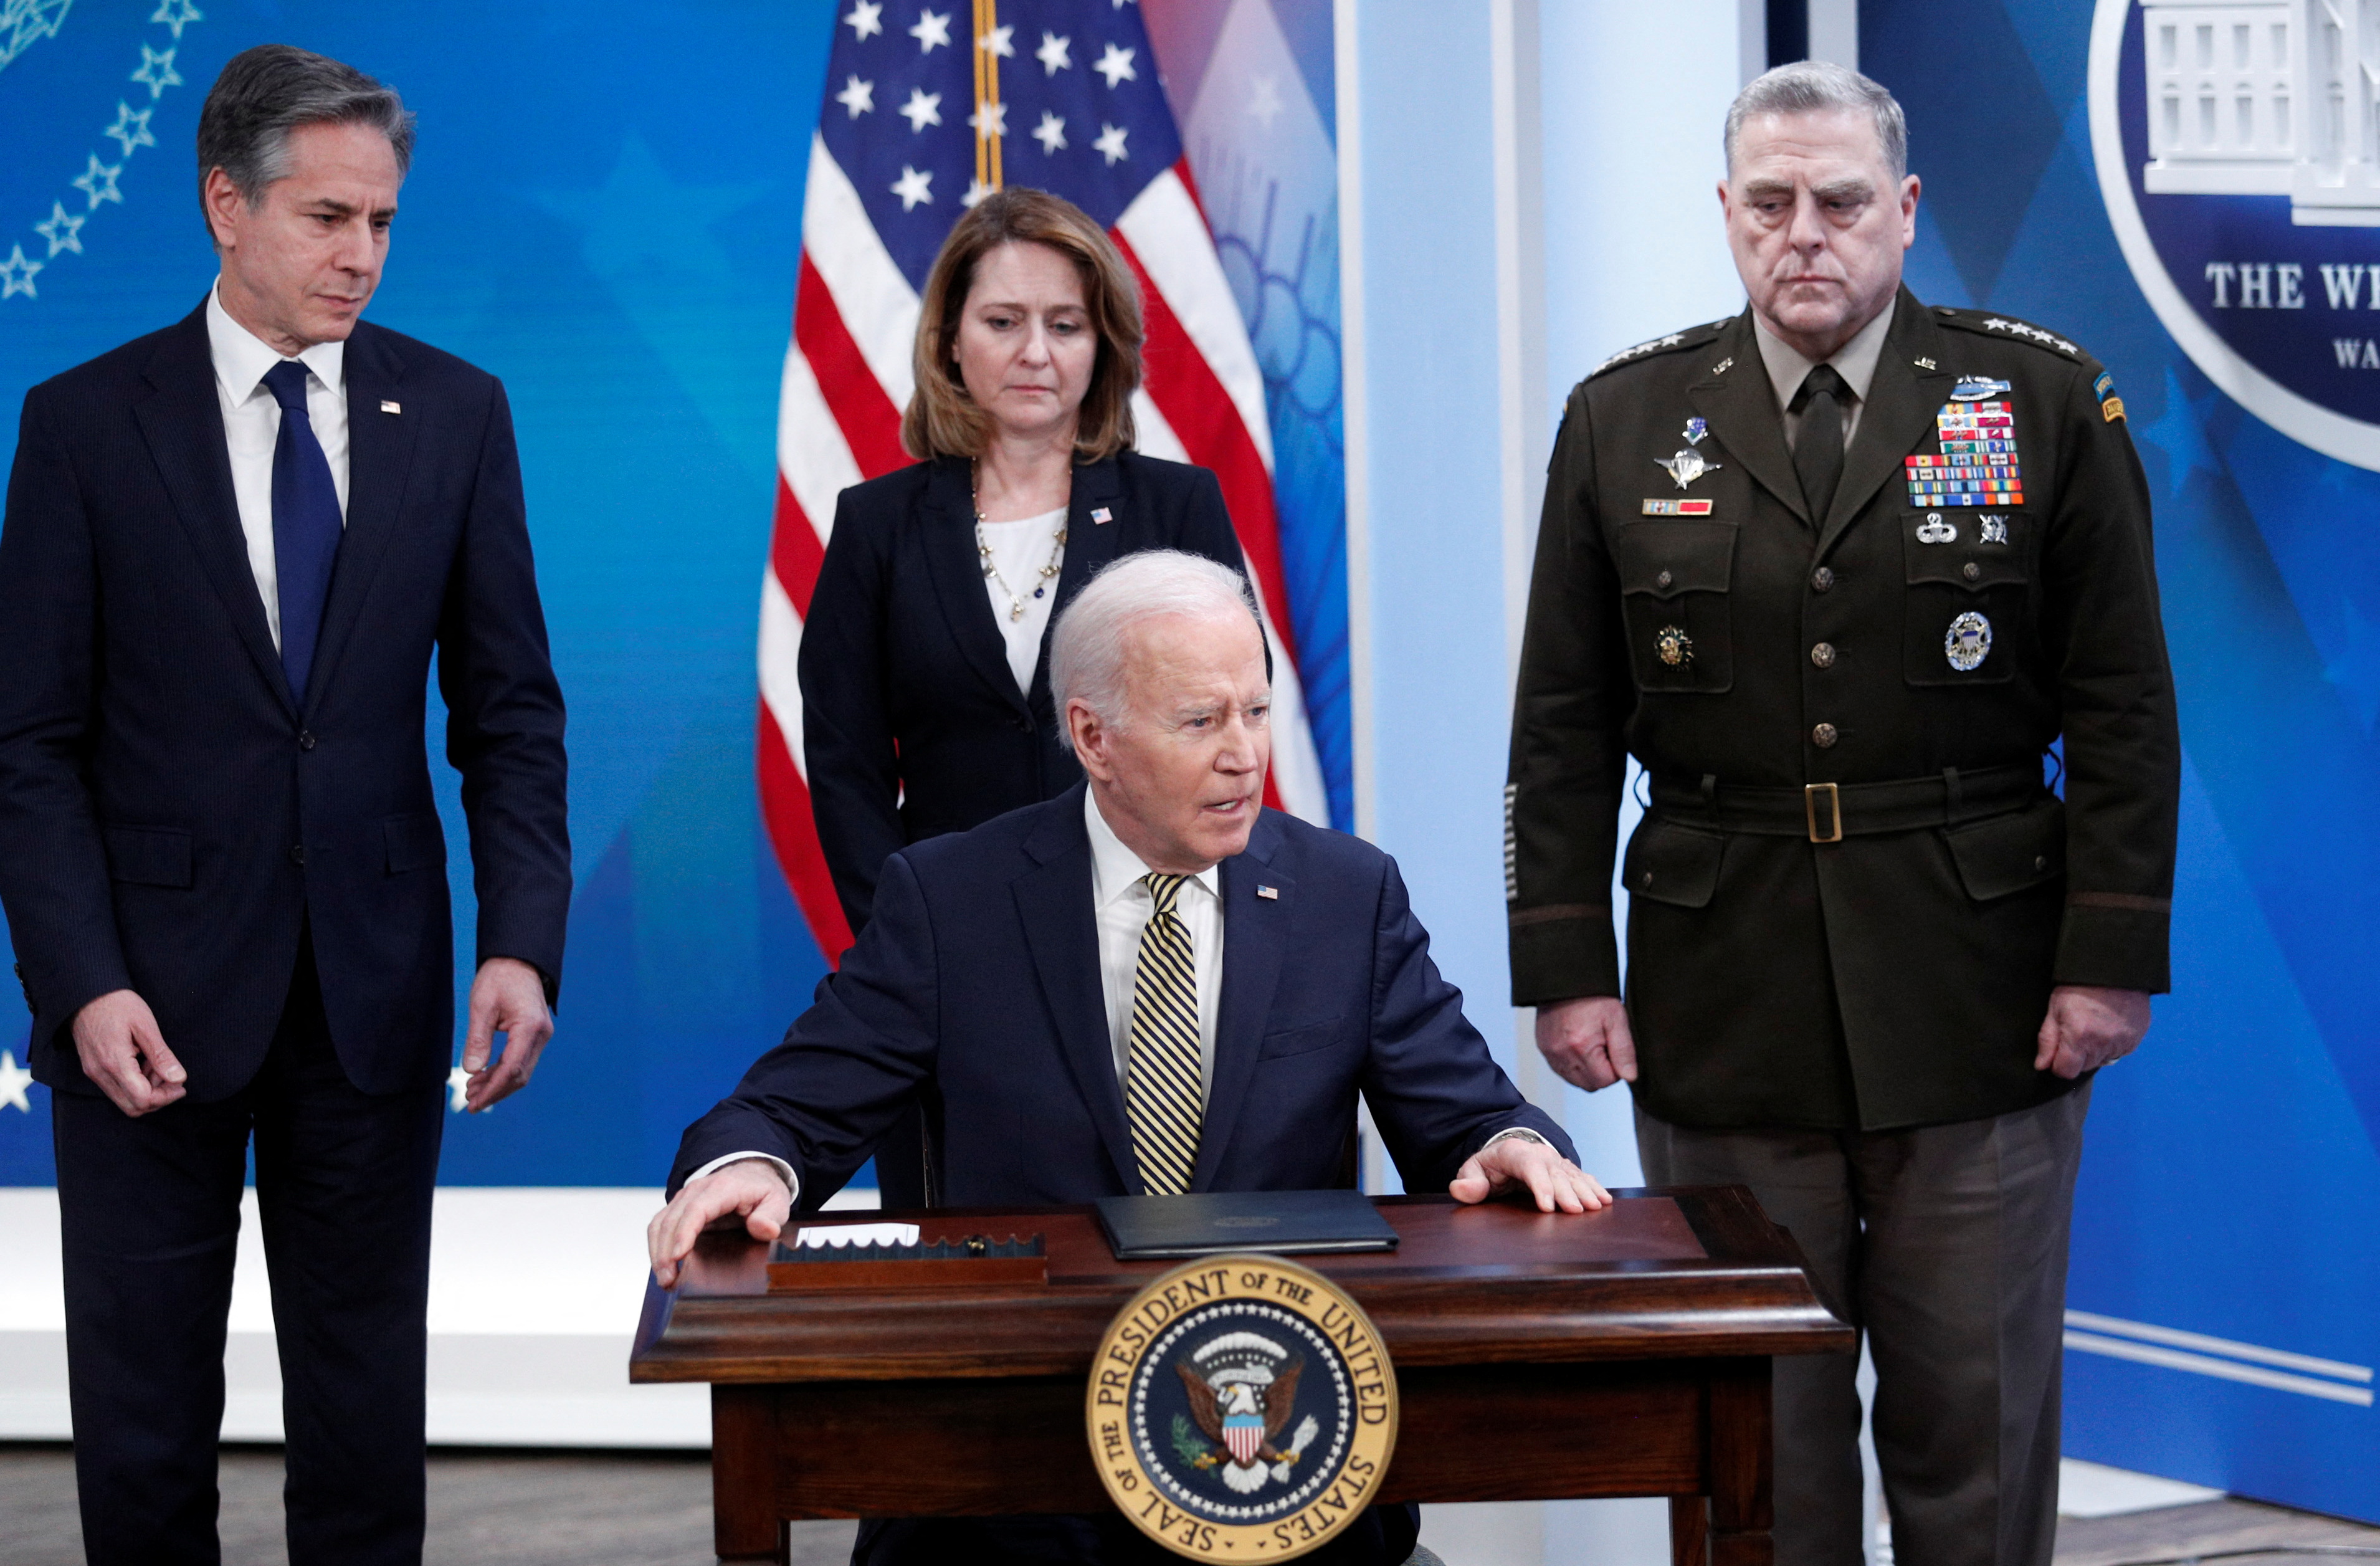 U.S. President Joe Biden speaks about Russia's war in Ukraine and assistance being provided to Ukraine by the U.S., at the White House in Washington